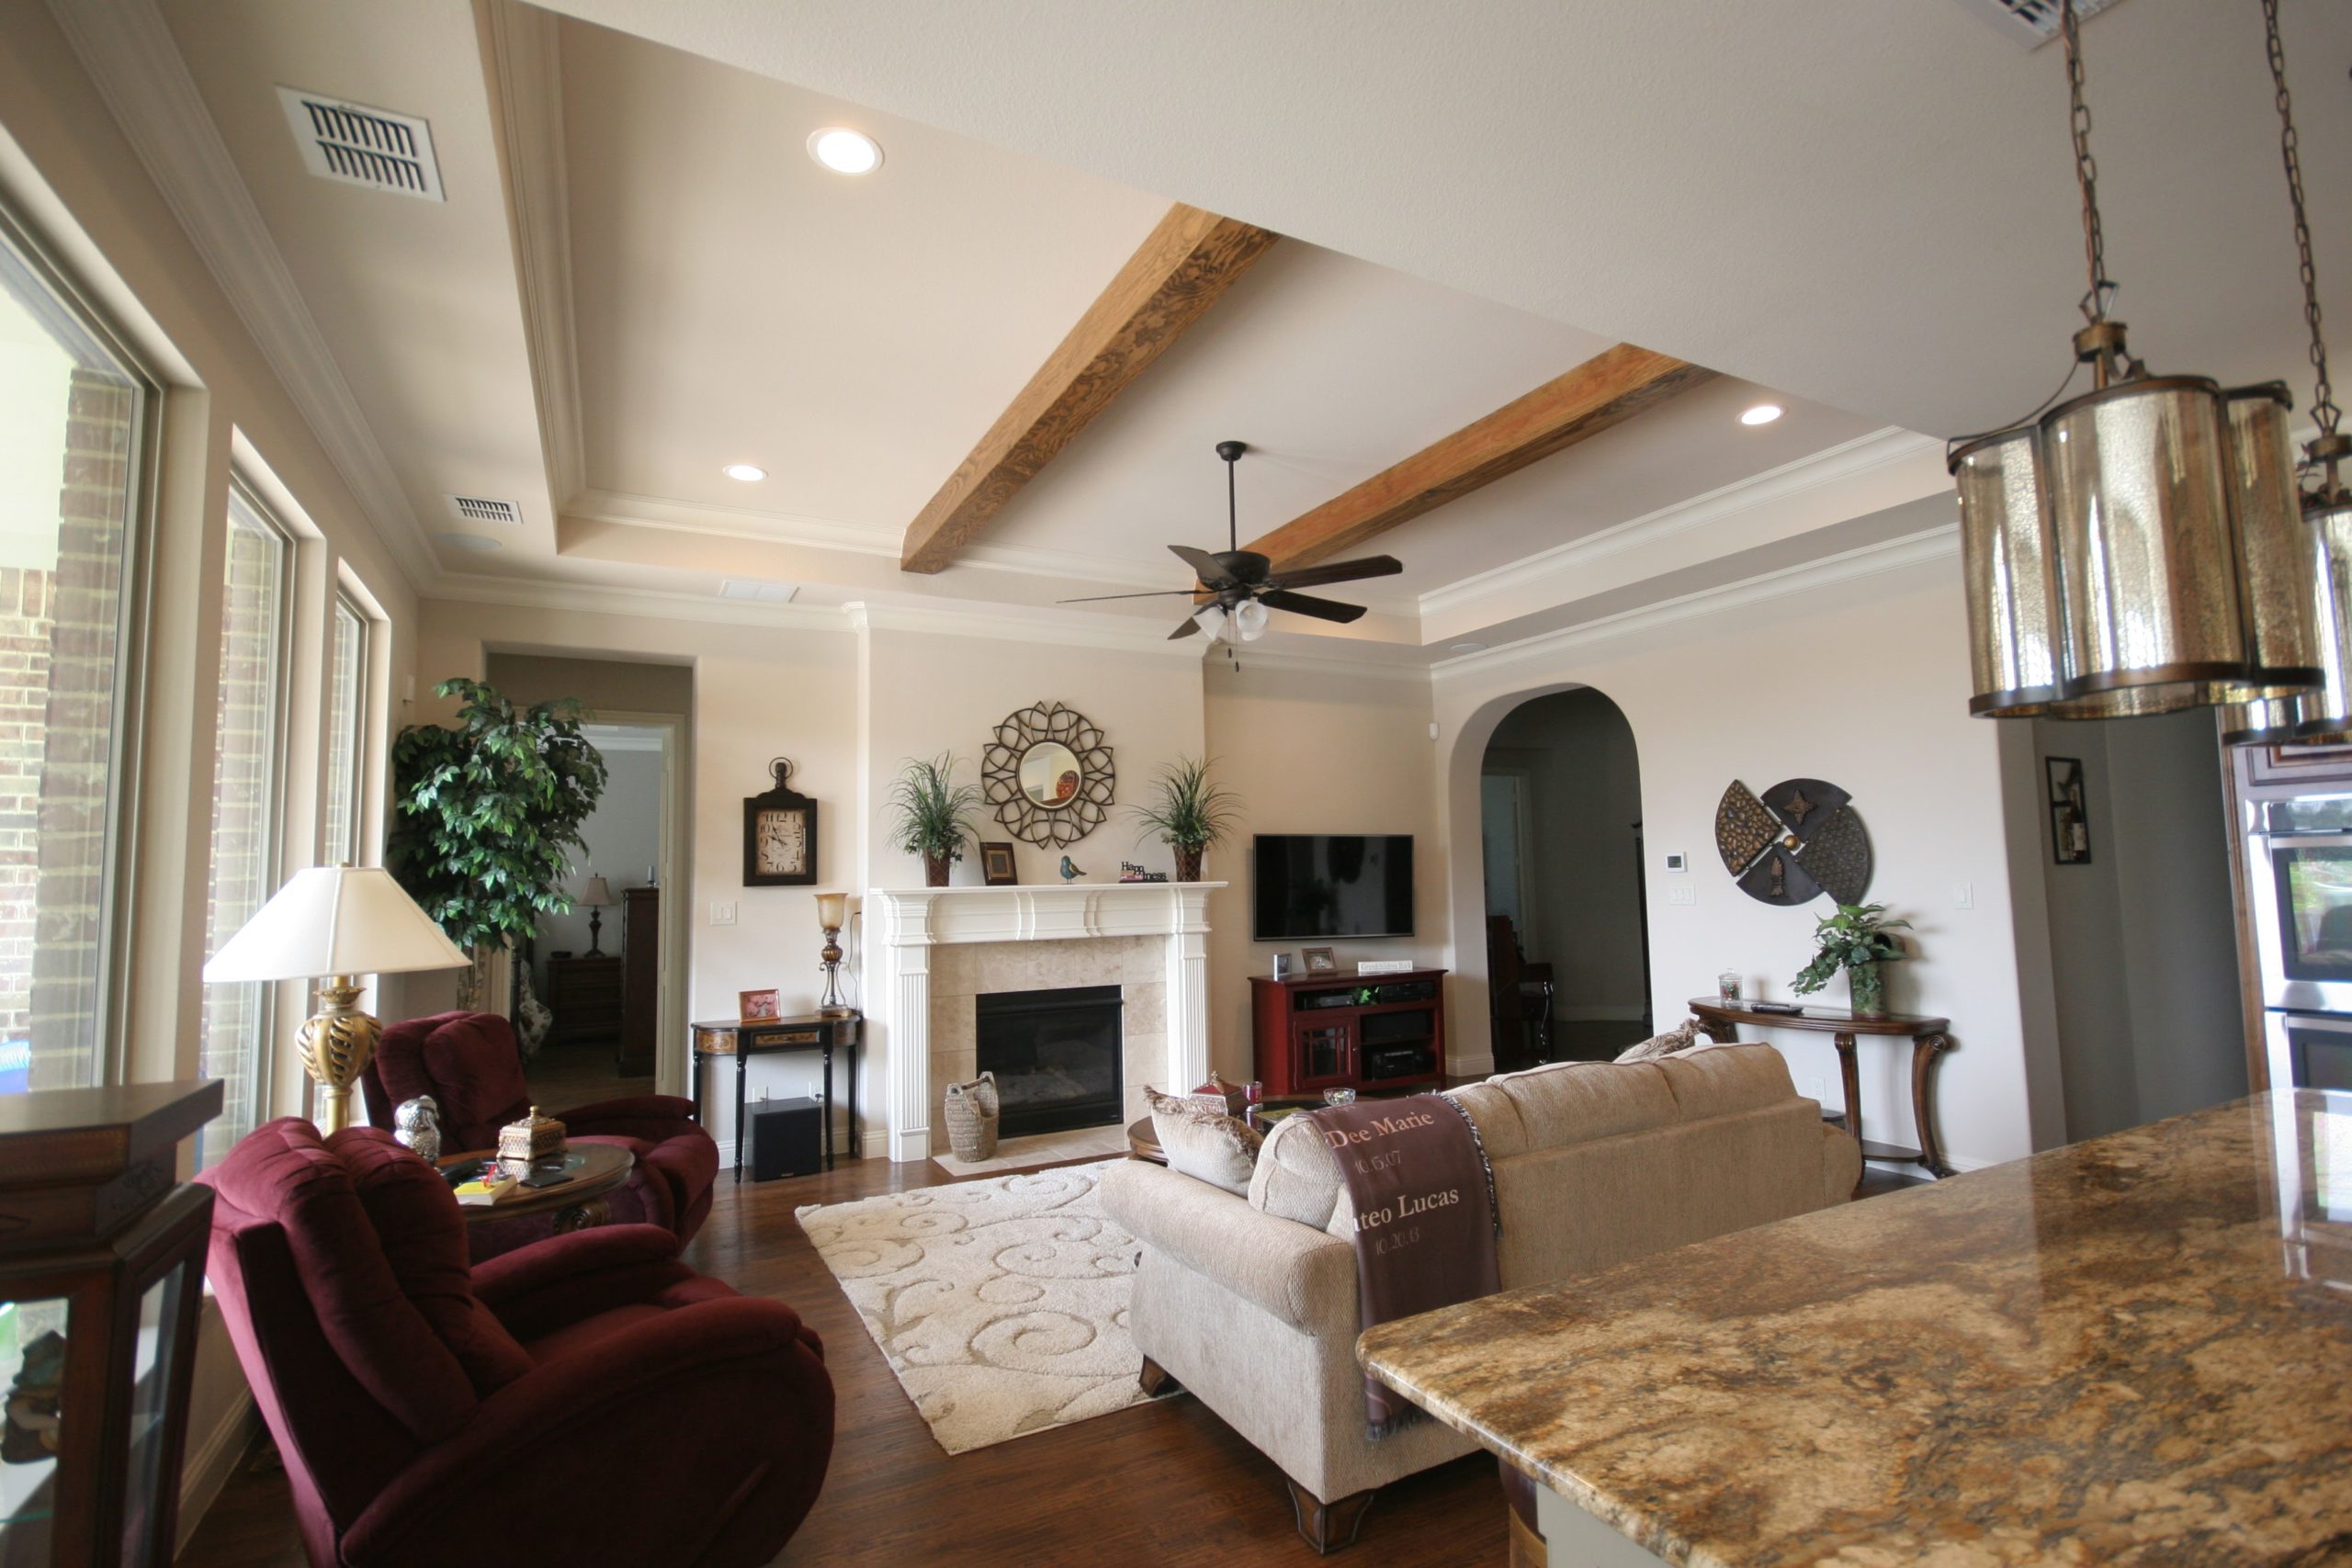 Natural accent ceiling beams - Latham